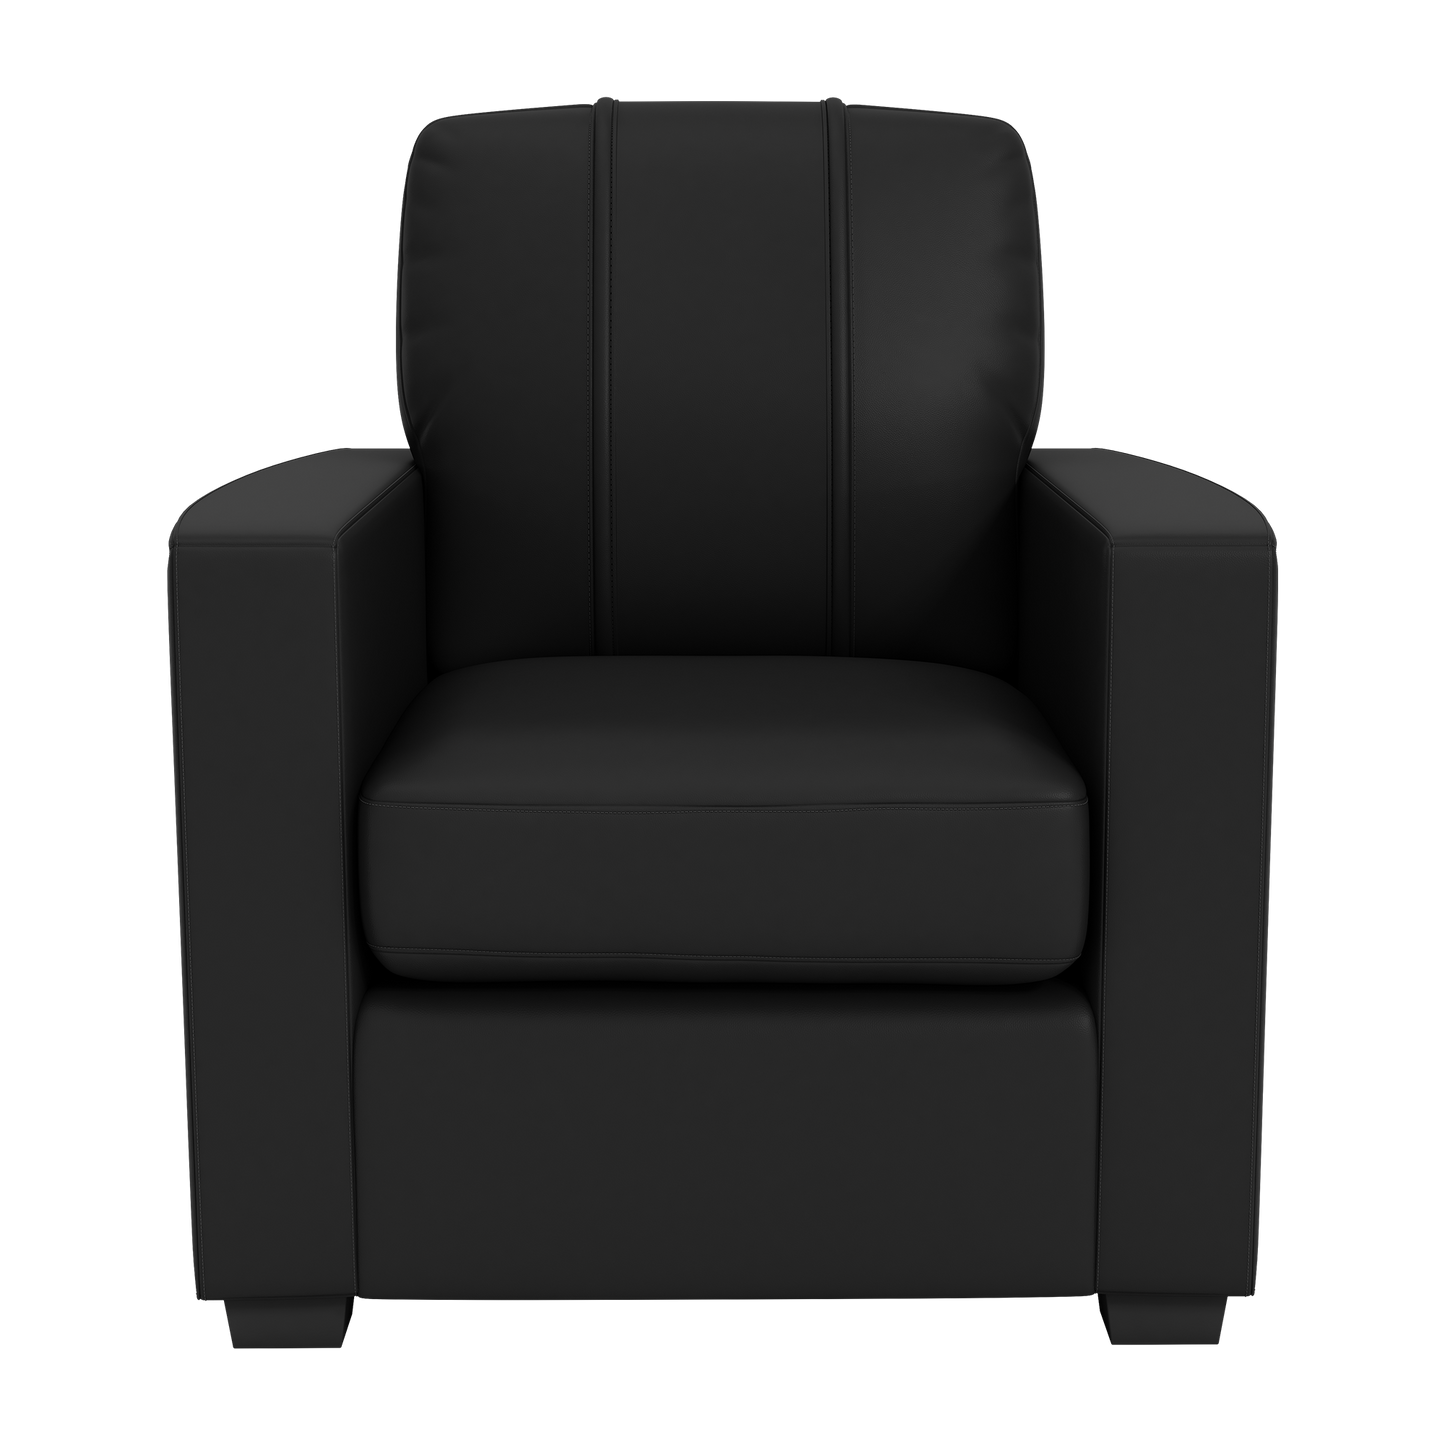 Silver Club Chair with Memphis Grizz Gaming Logo